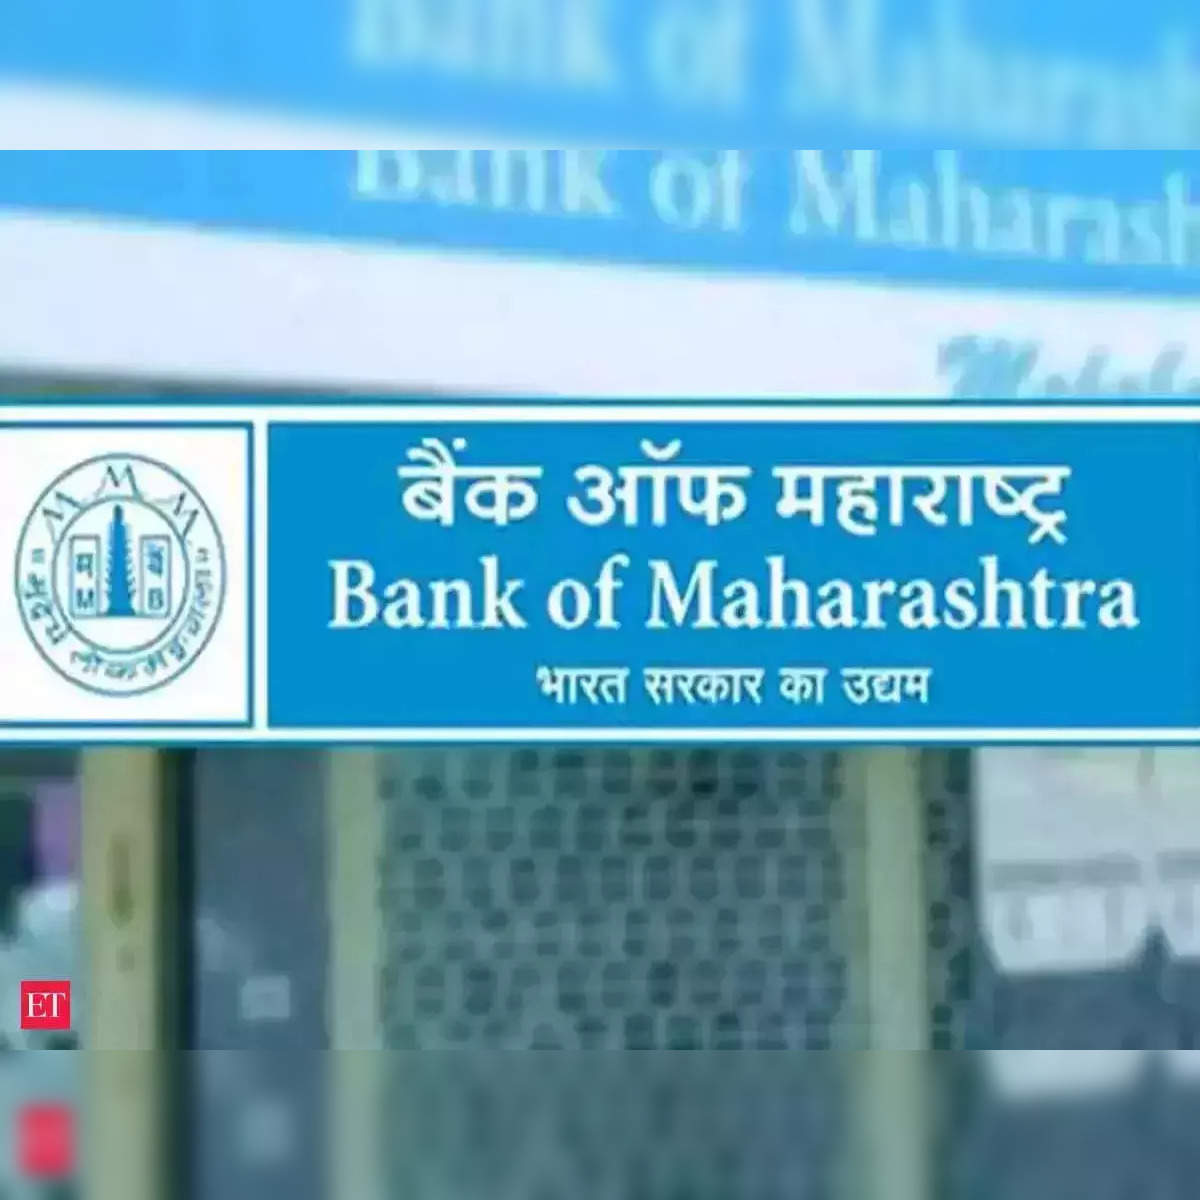 Bank Of Maharashtra Invites Applications For 551 Officers Posts: Check  Details Here